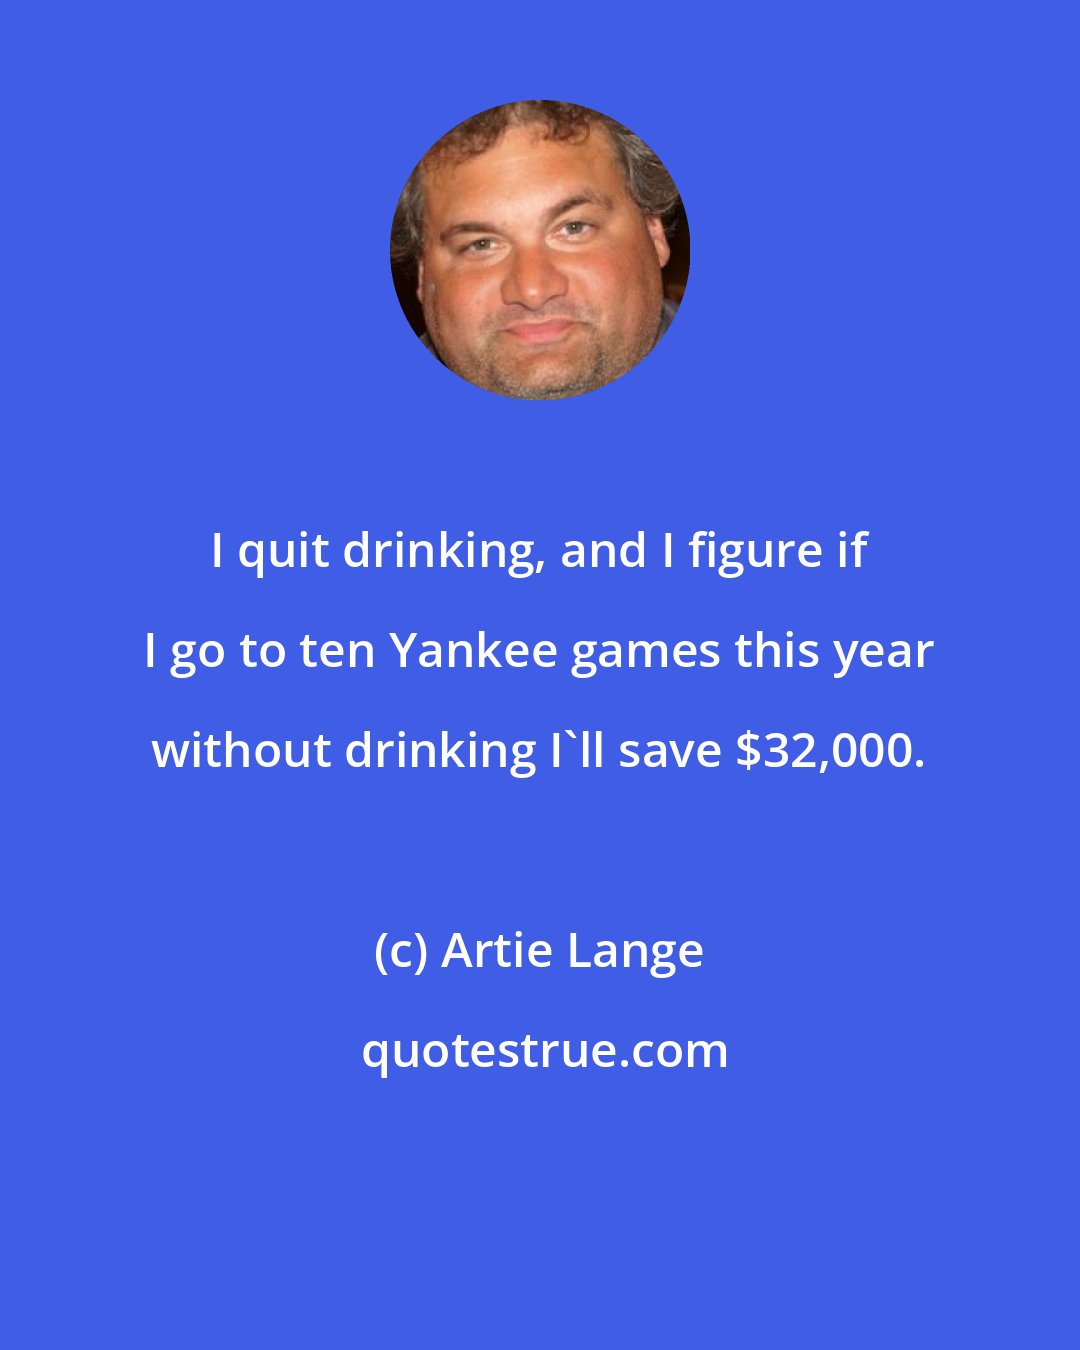 Artie Lange: I quit drinking, and I figure if I go to ten Yankee games this year without drinking I'll save $32,000.